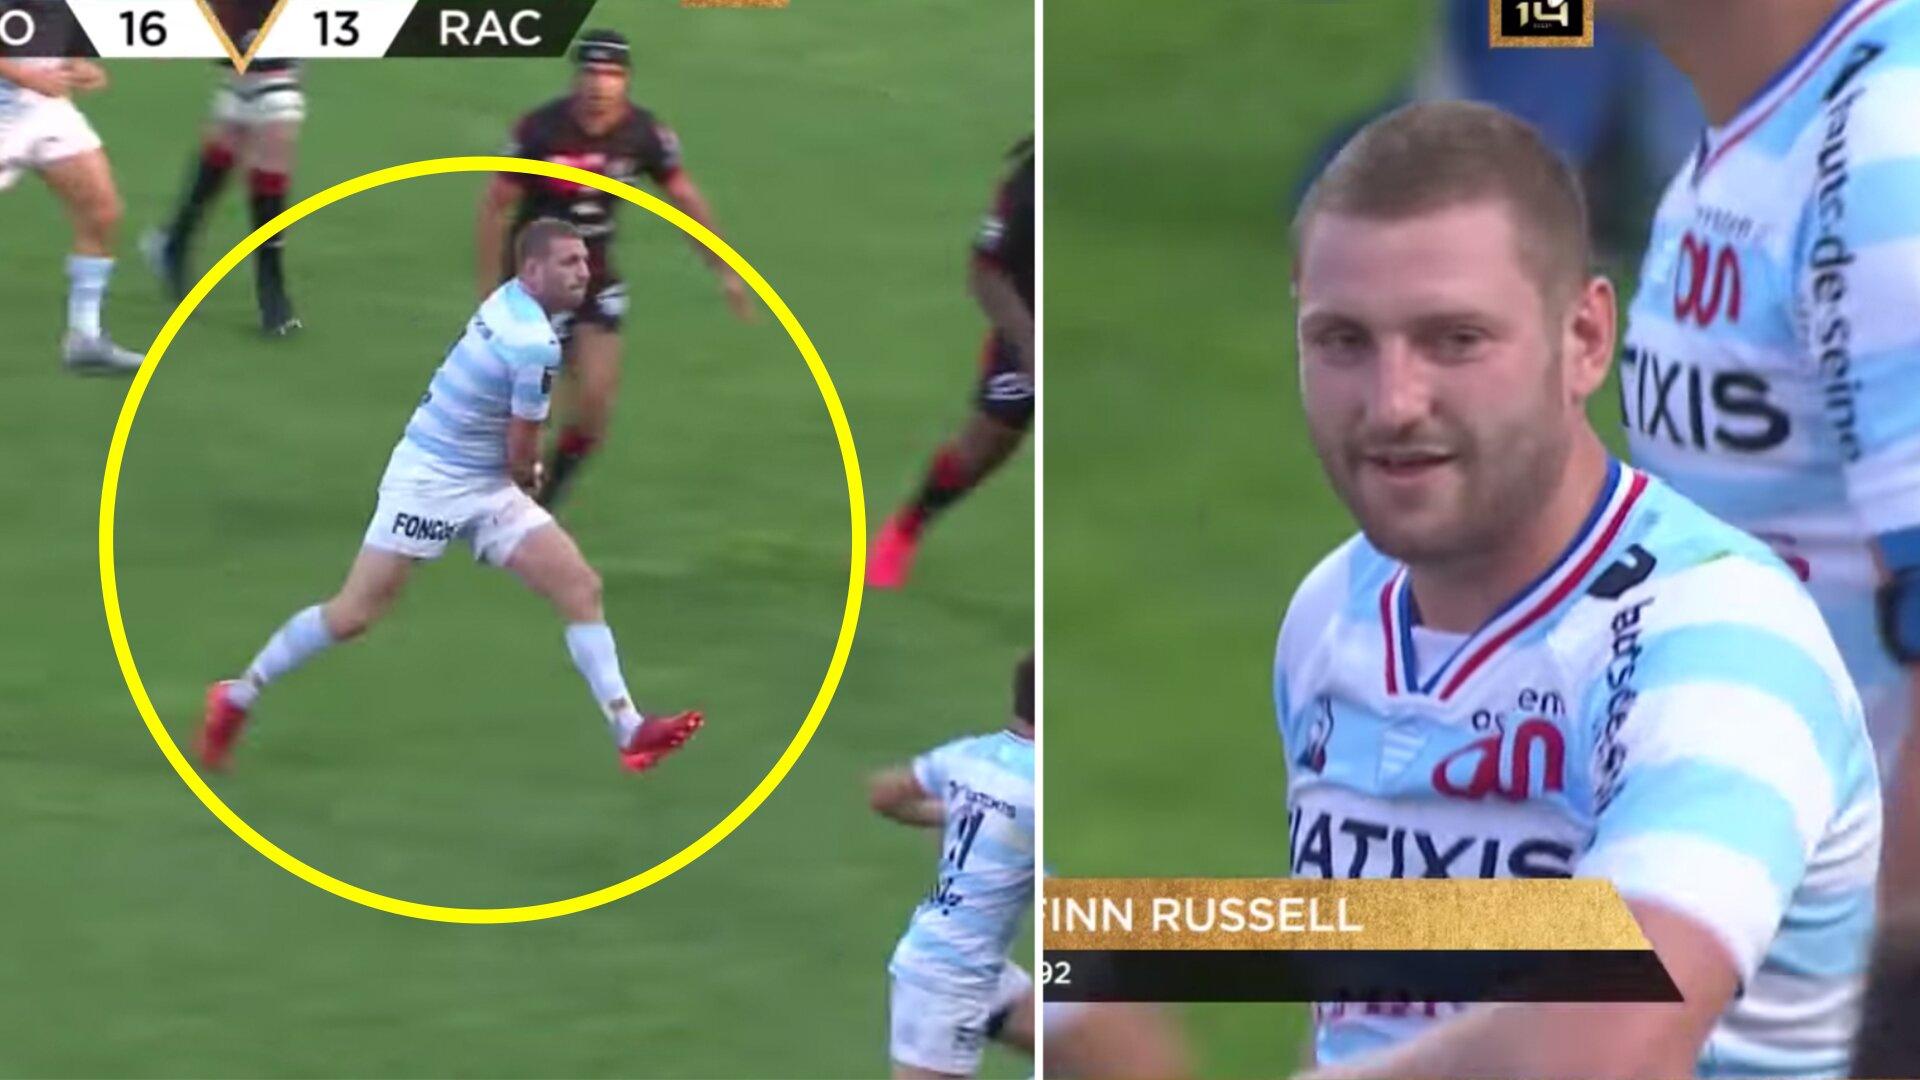 Finn Russell is back to embarrassing players in France